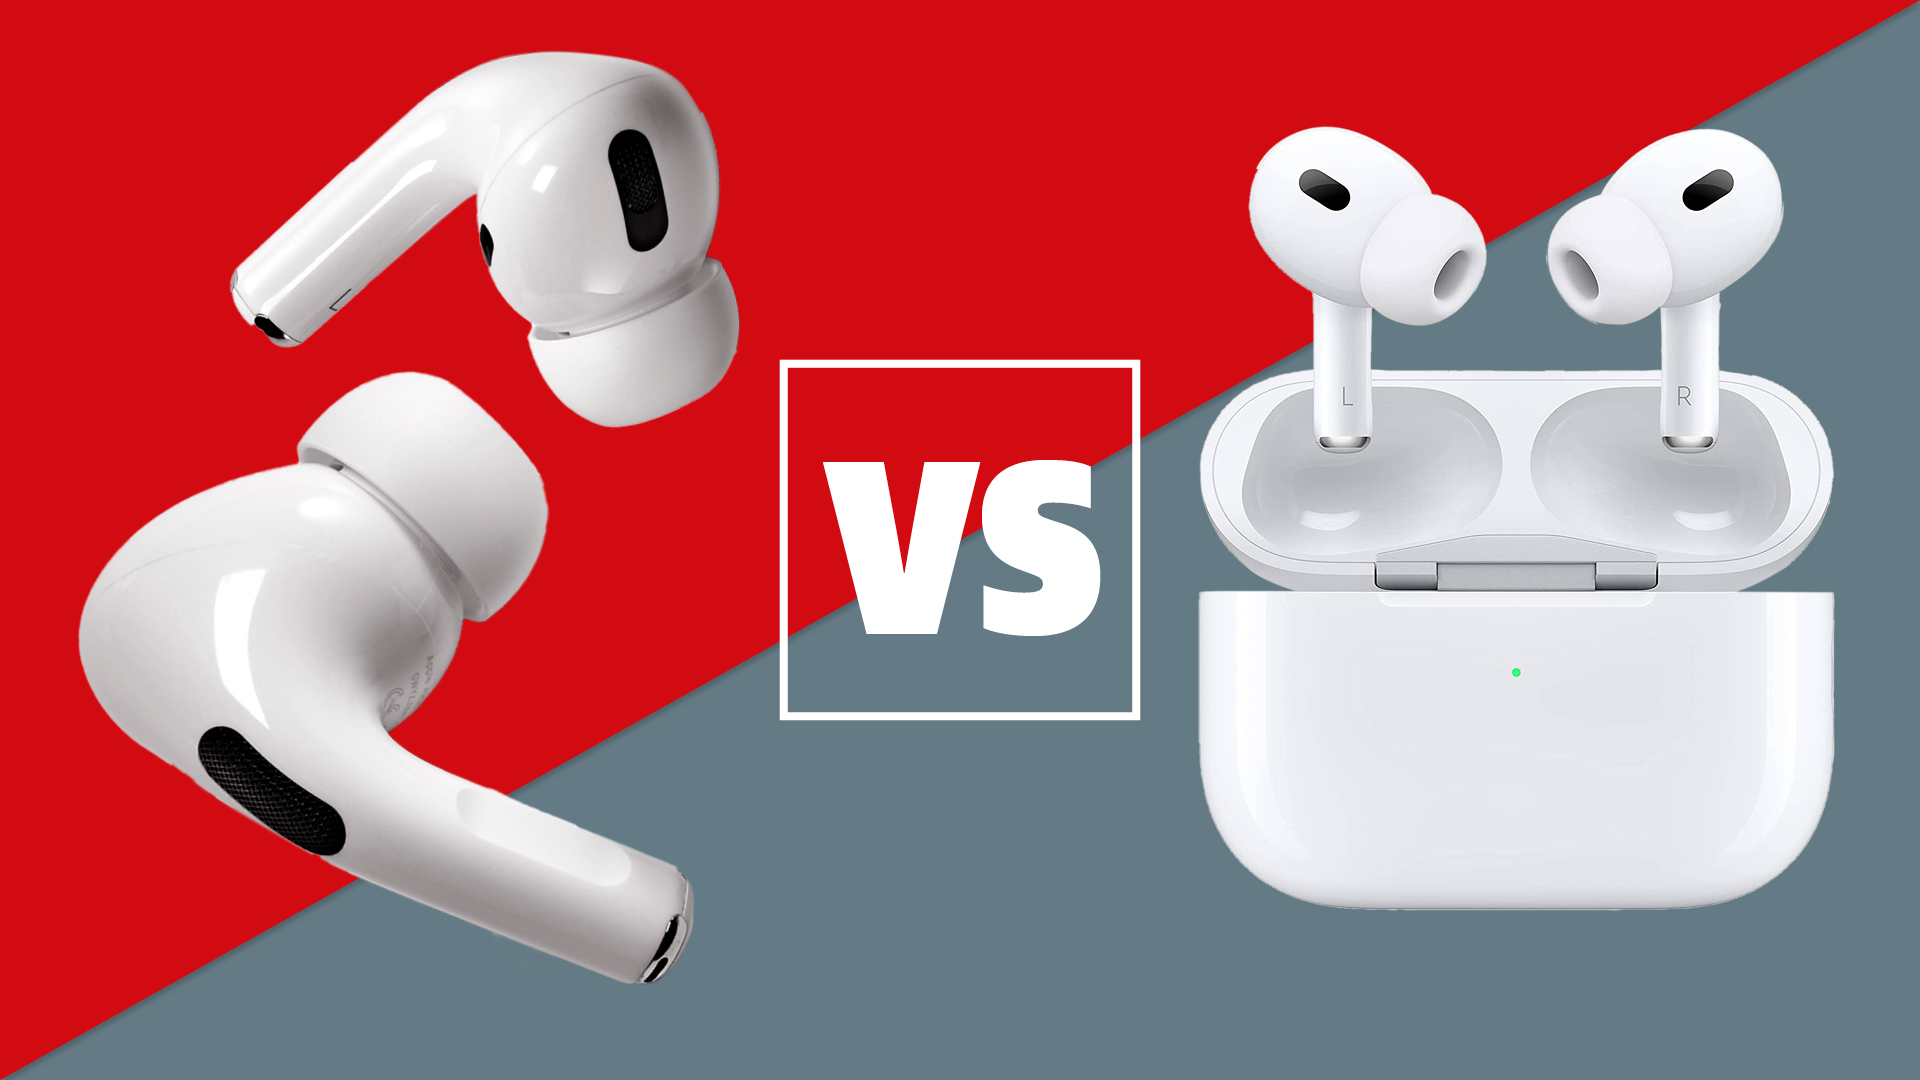 Apple AirPods Pro (second-gen) review: same look, better